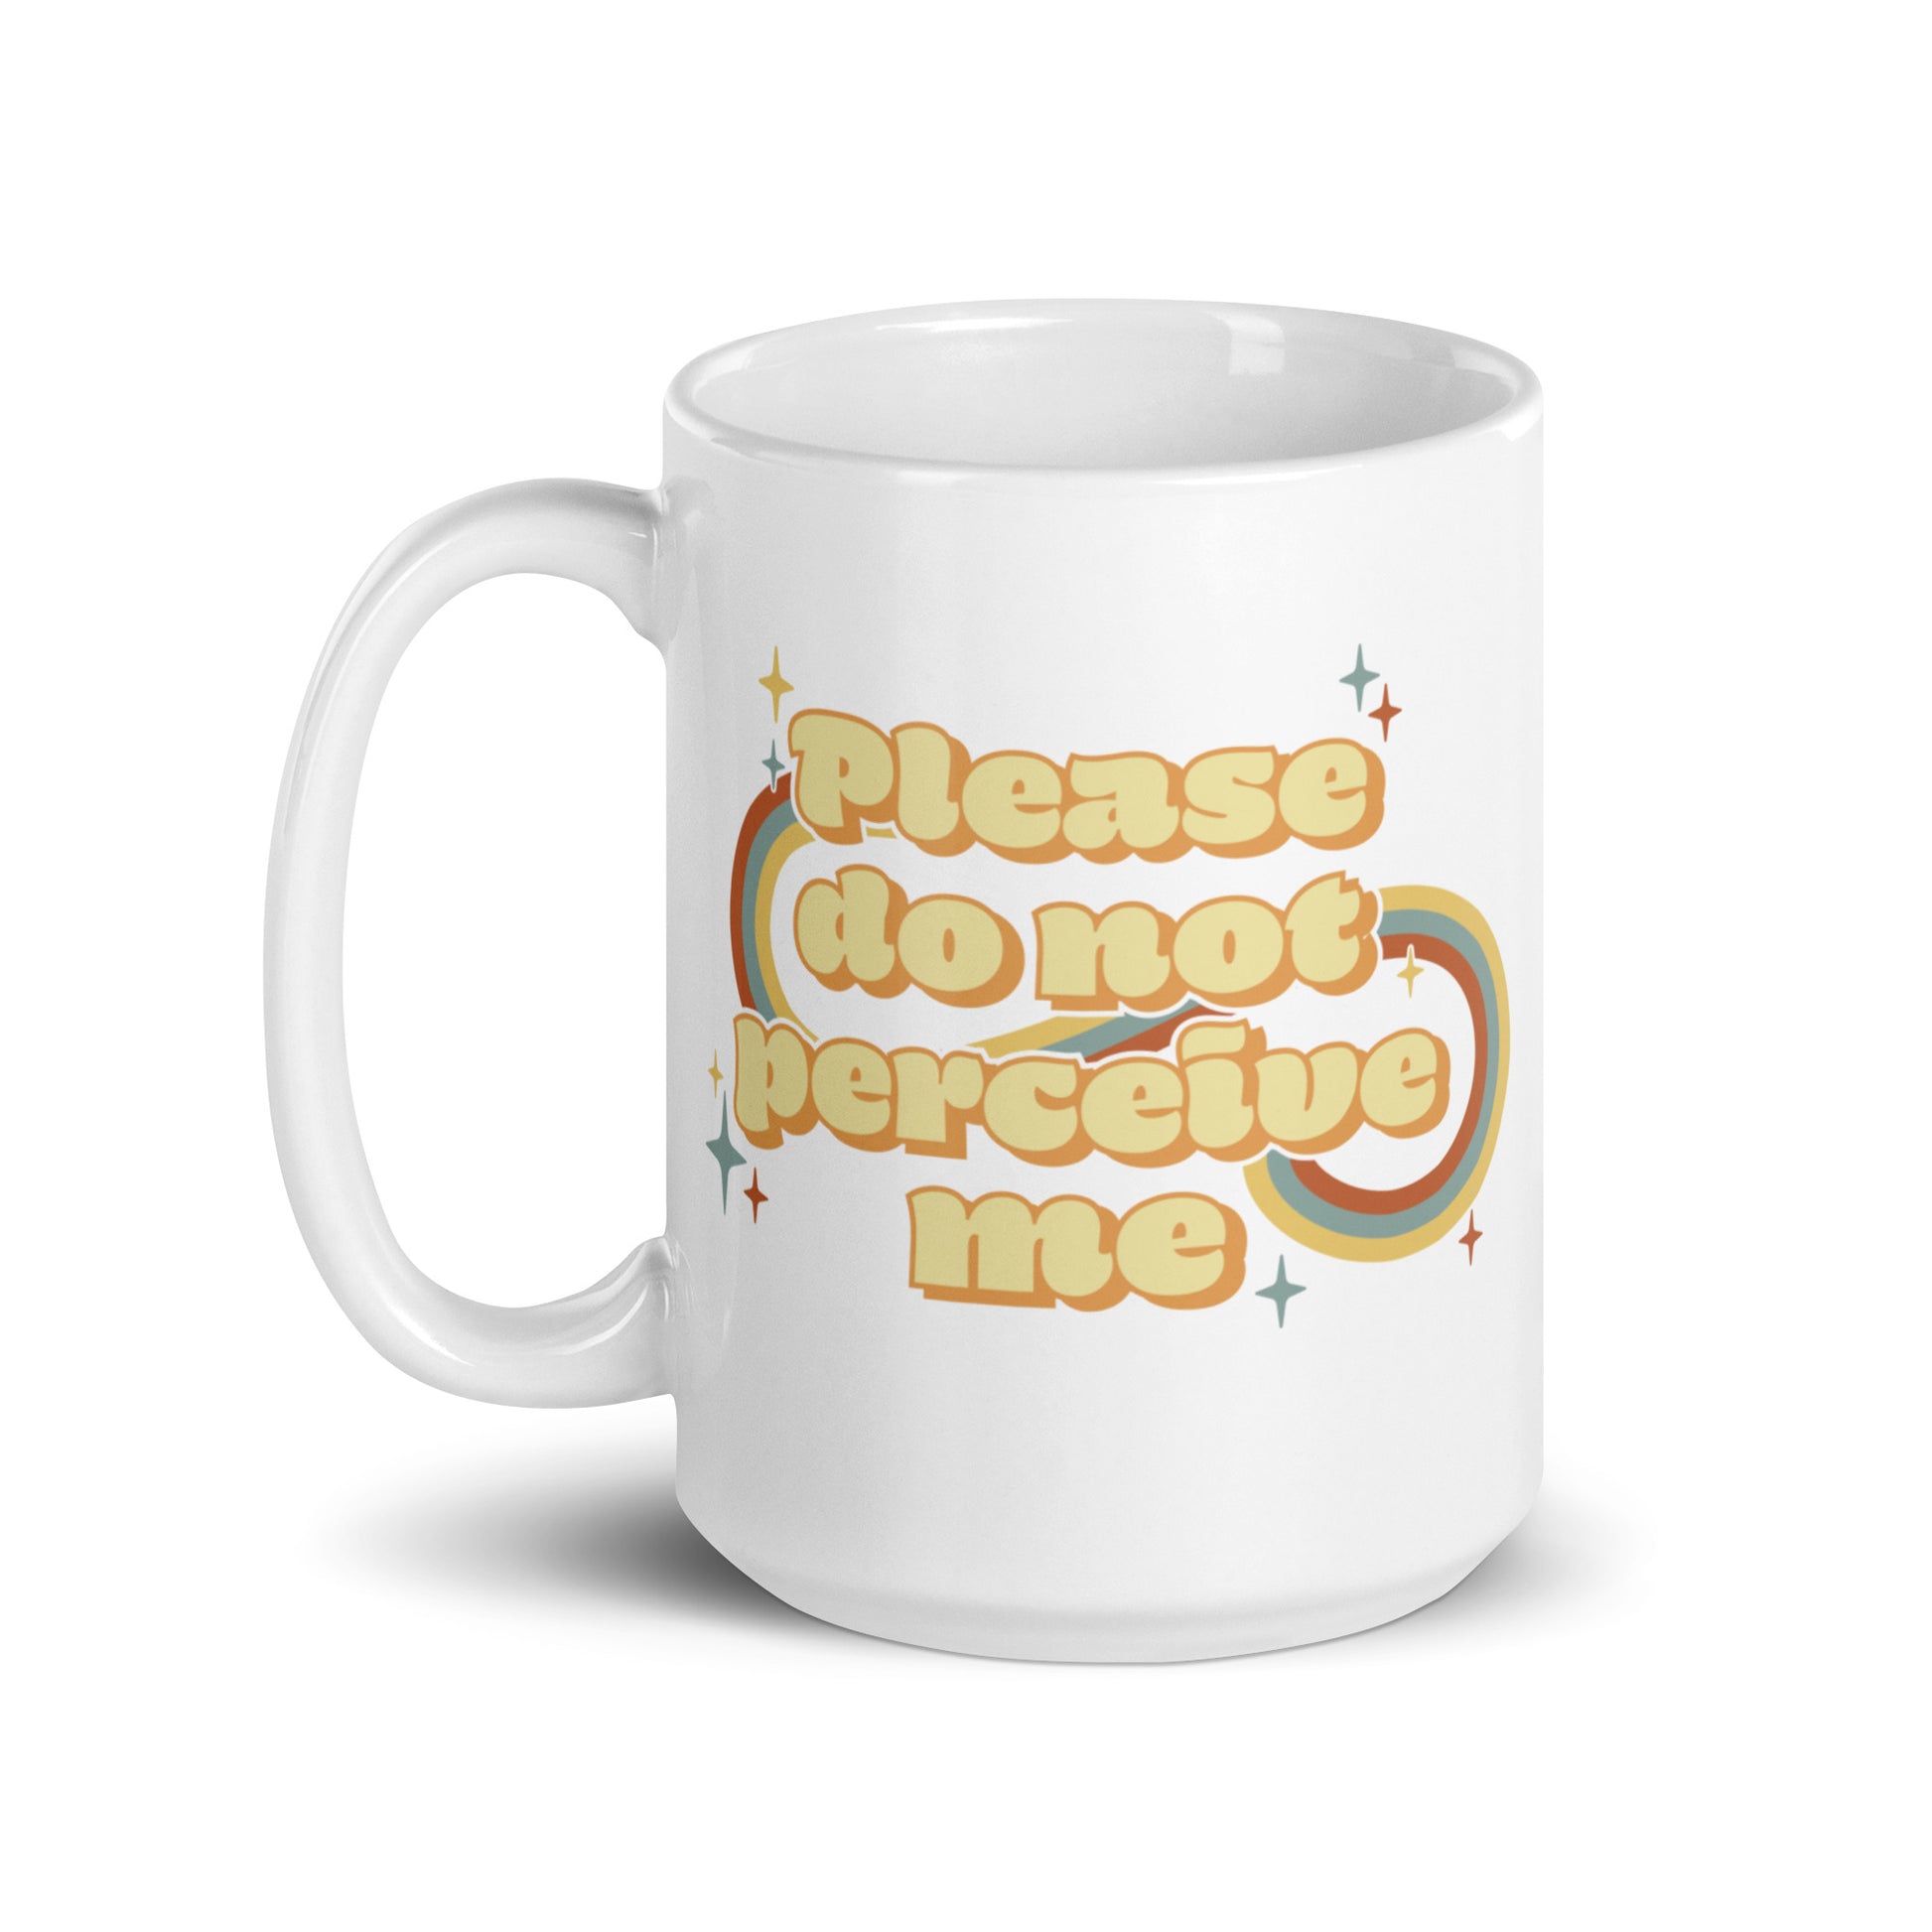 An 15 ounce white ceramic mug featuring vintage-style text that reads "Please do not perceive me". A colorful swirl and sparkles surrounds the text in red, yellow, and blue.